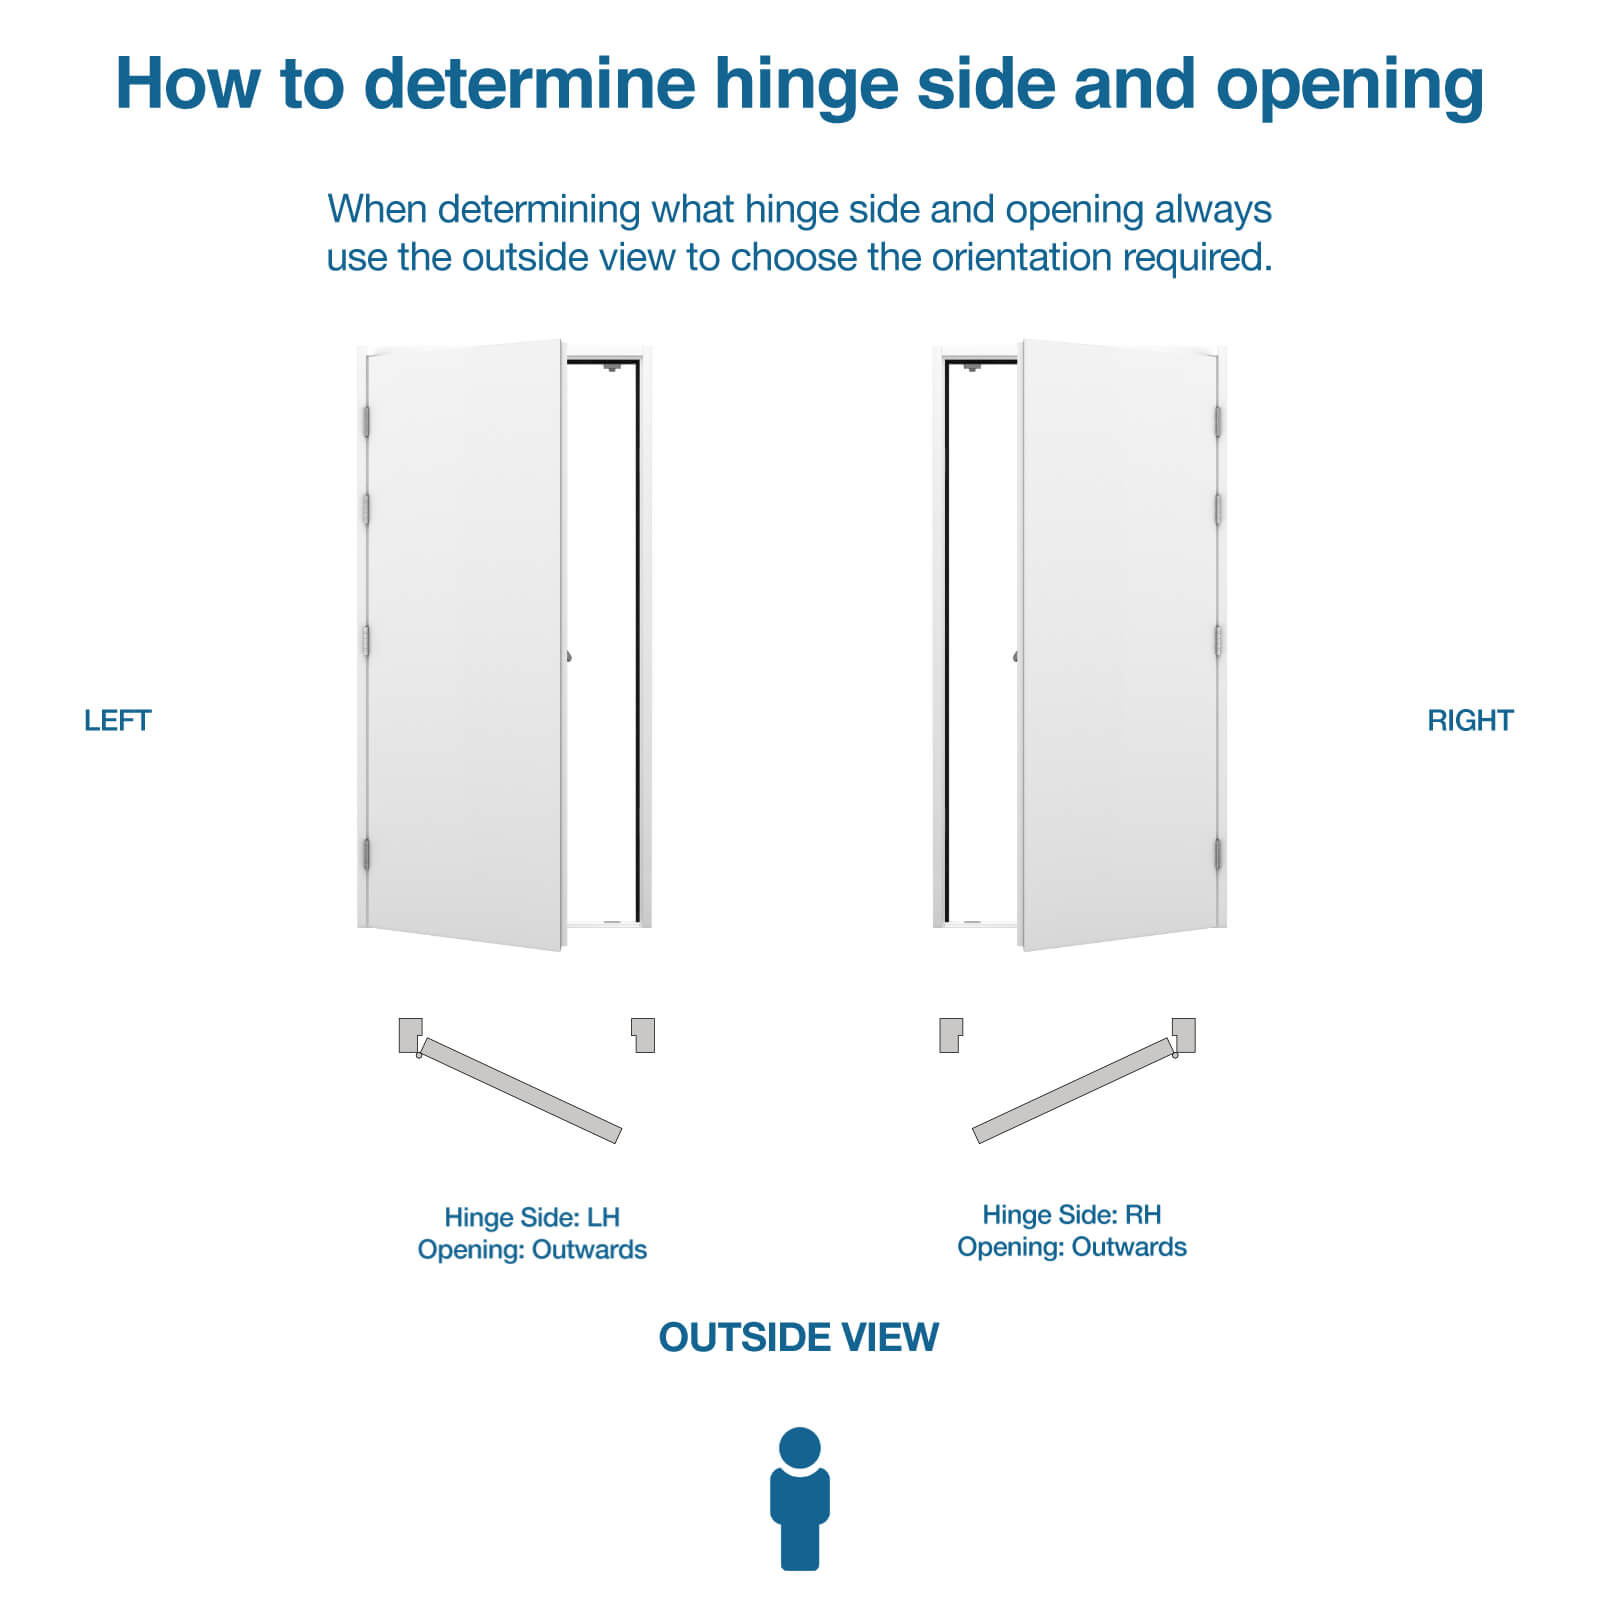 Diagram showing how to choose hinge side and opening for steel fire exit doors